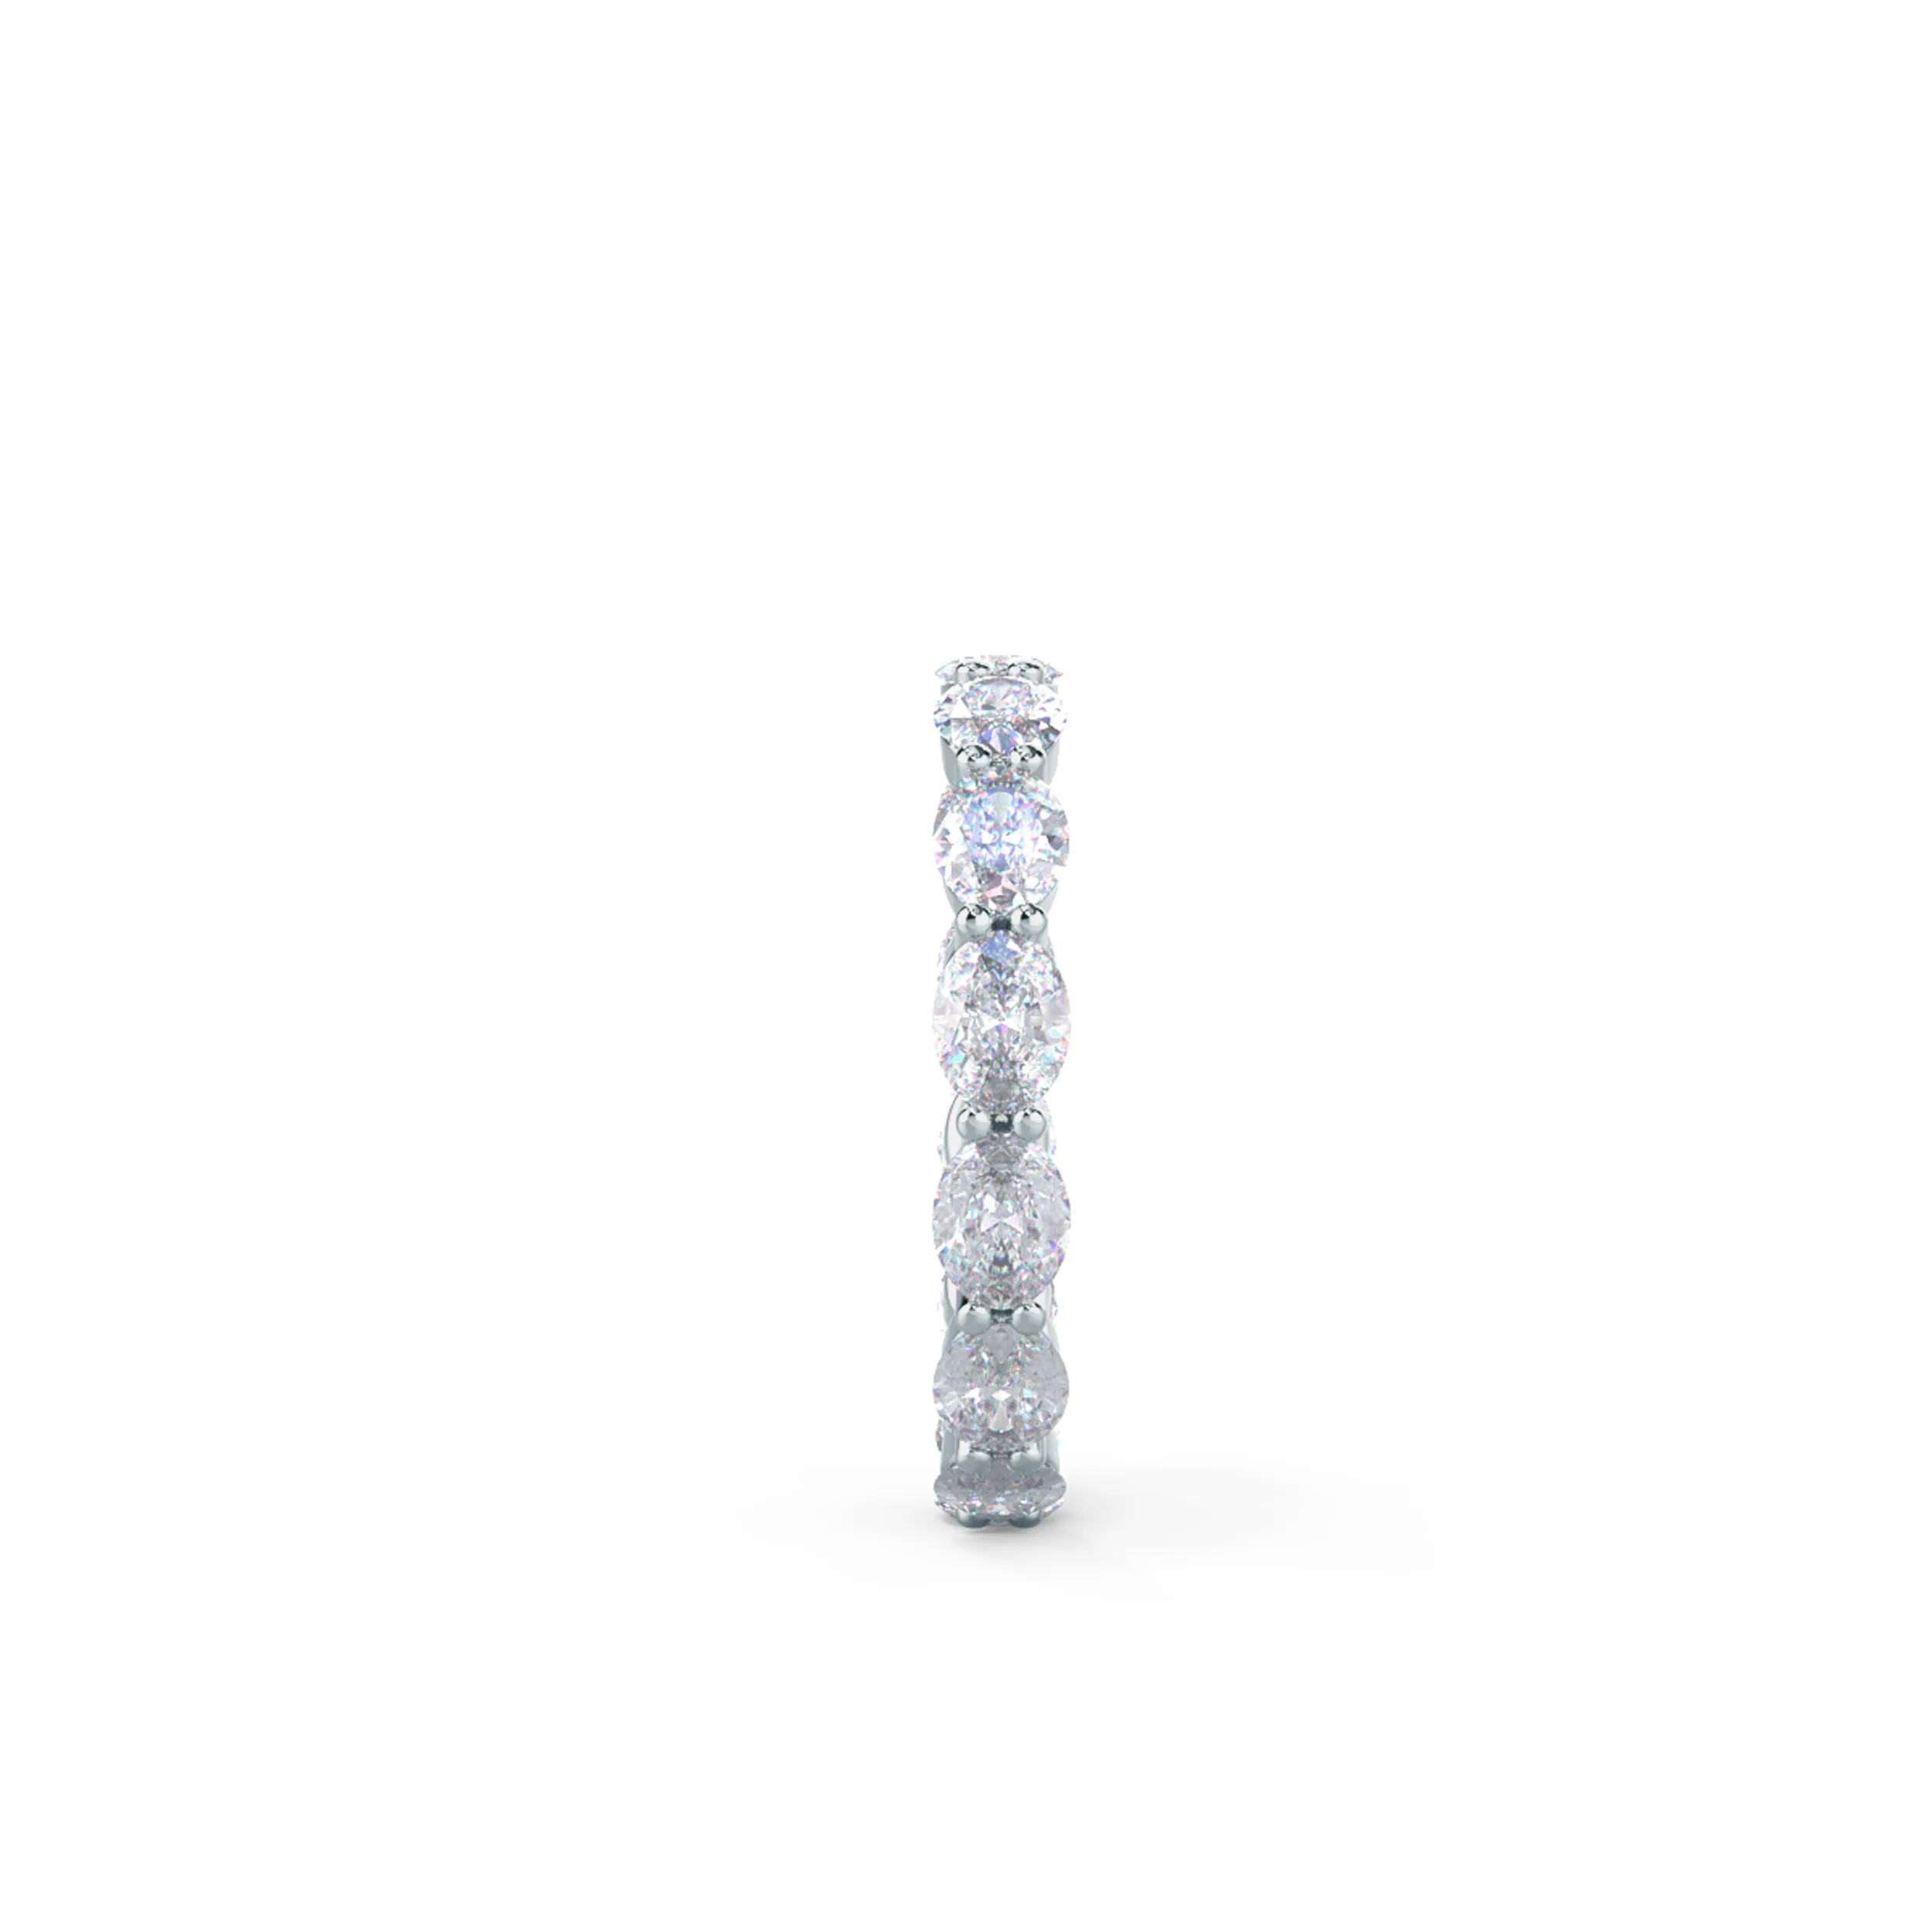 High Quality 2.0 Carat Diamonds East-West Oval Diamond Eternity Band in 18k White Gold (Side View)